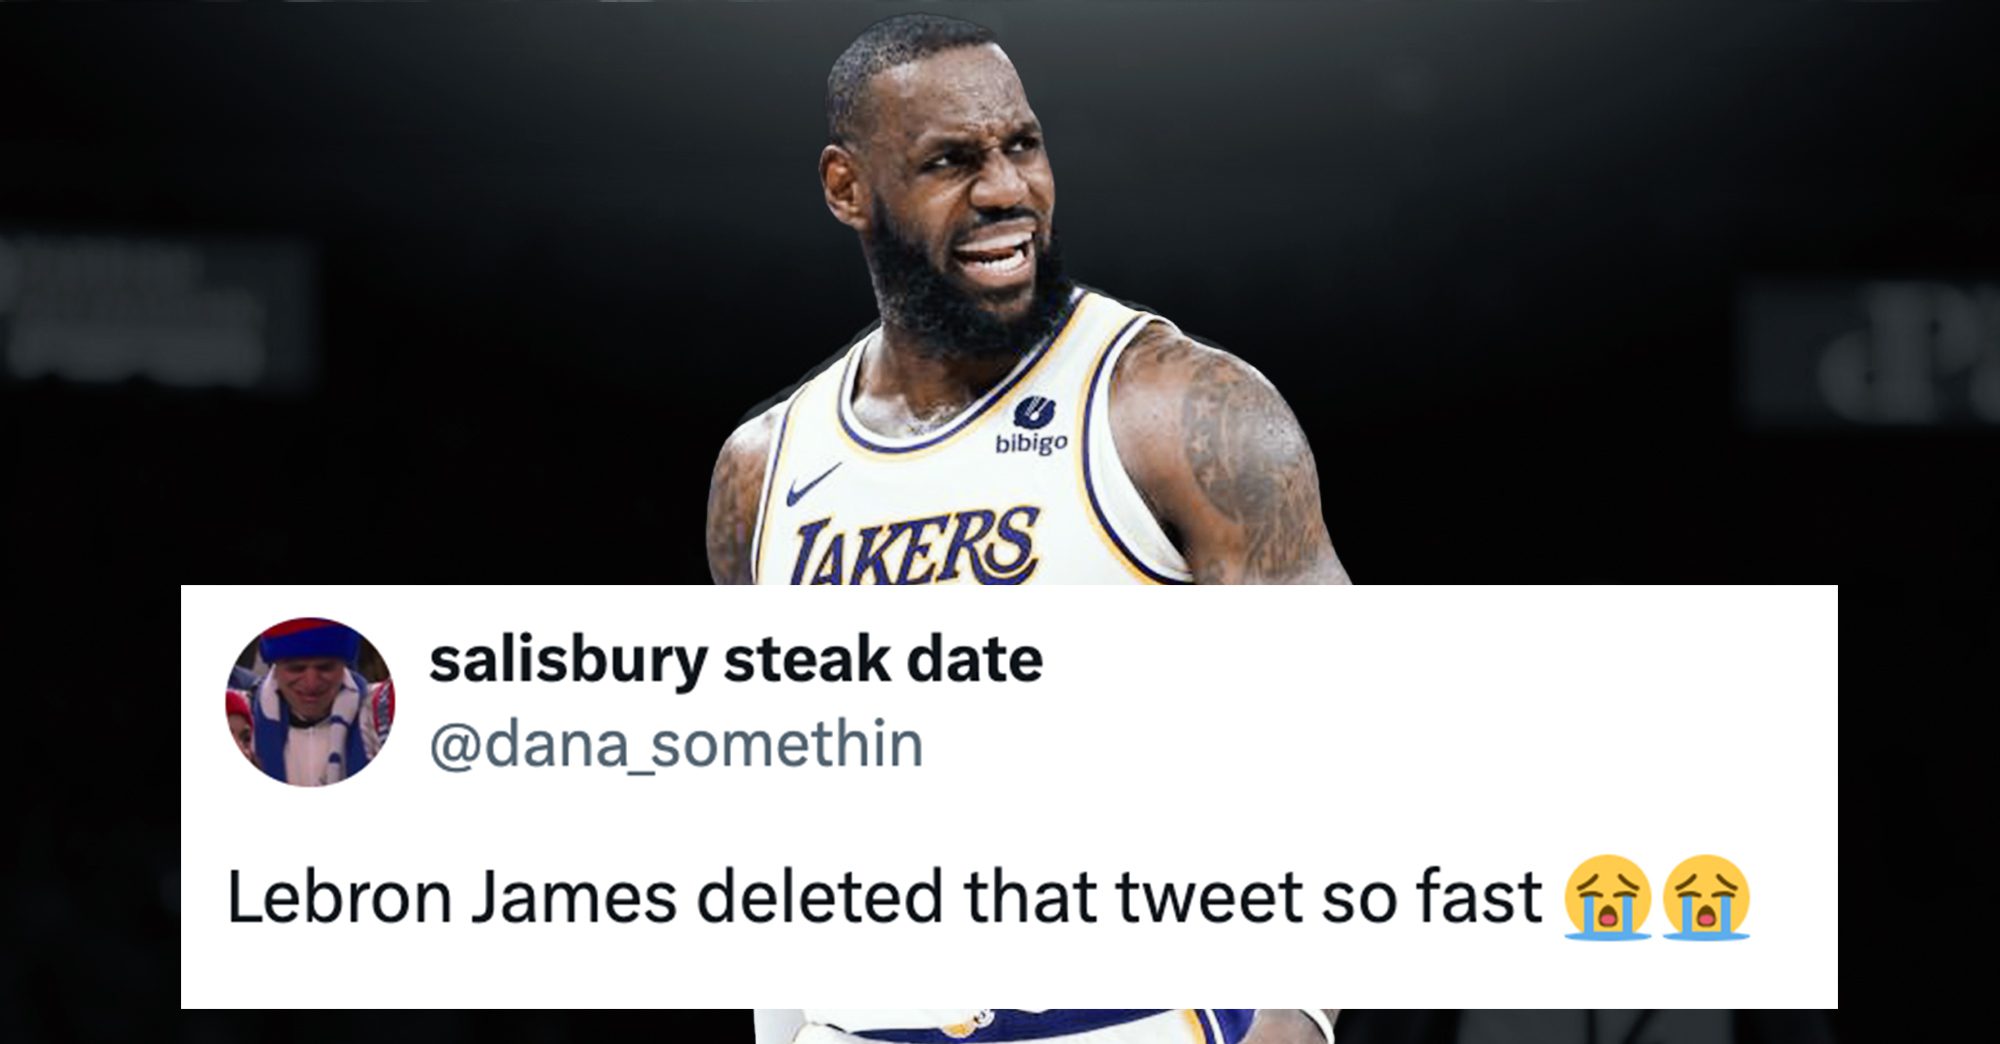 LeBron James Called Out for Deleted Tweet